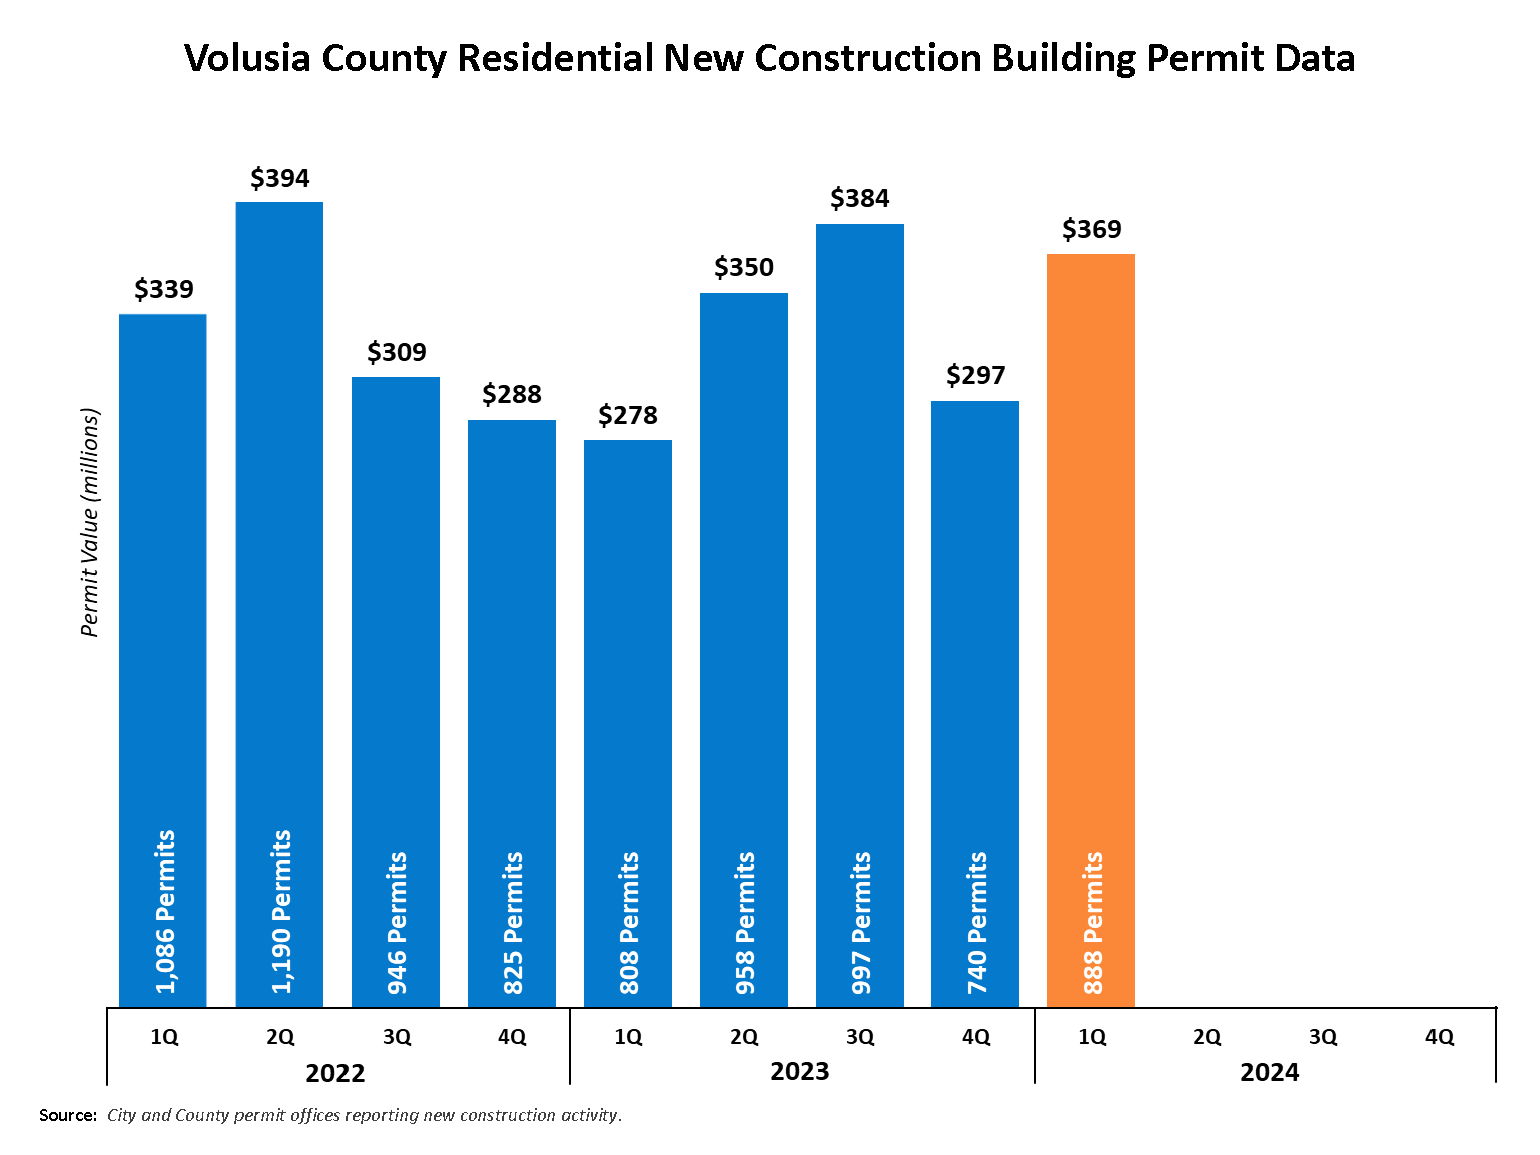 This chart shows a 3 year history by quarter of residential new construction building permits in Volusia County. There were 997 permits issued in the 3rd quarter 2023 for a value of $384 million. This brings the year-to-date total to 2,763 permits with a value of $1.01 billion. In 2022, there was a total of 4,047 permits and a value of $1.33 billion. Total permits for 2021 were 4,367 for a value of $1.335 billion.